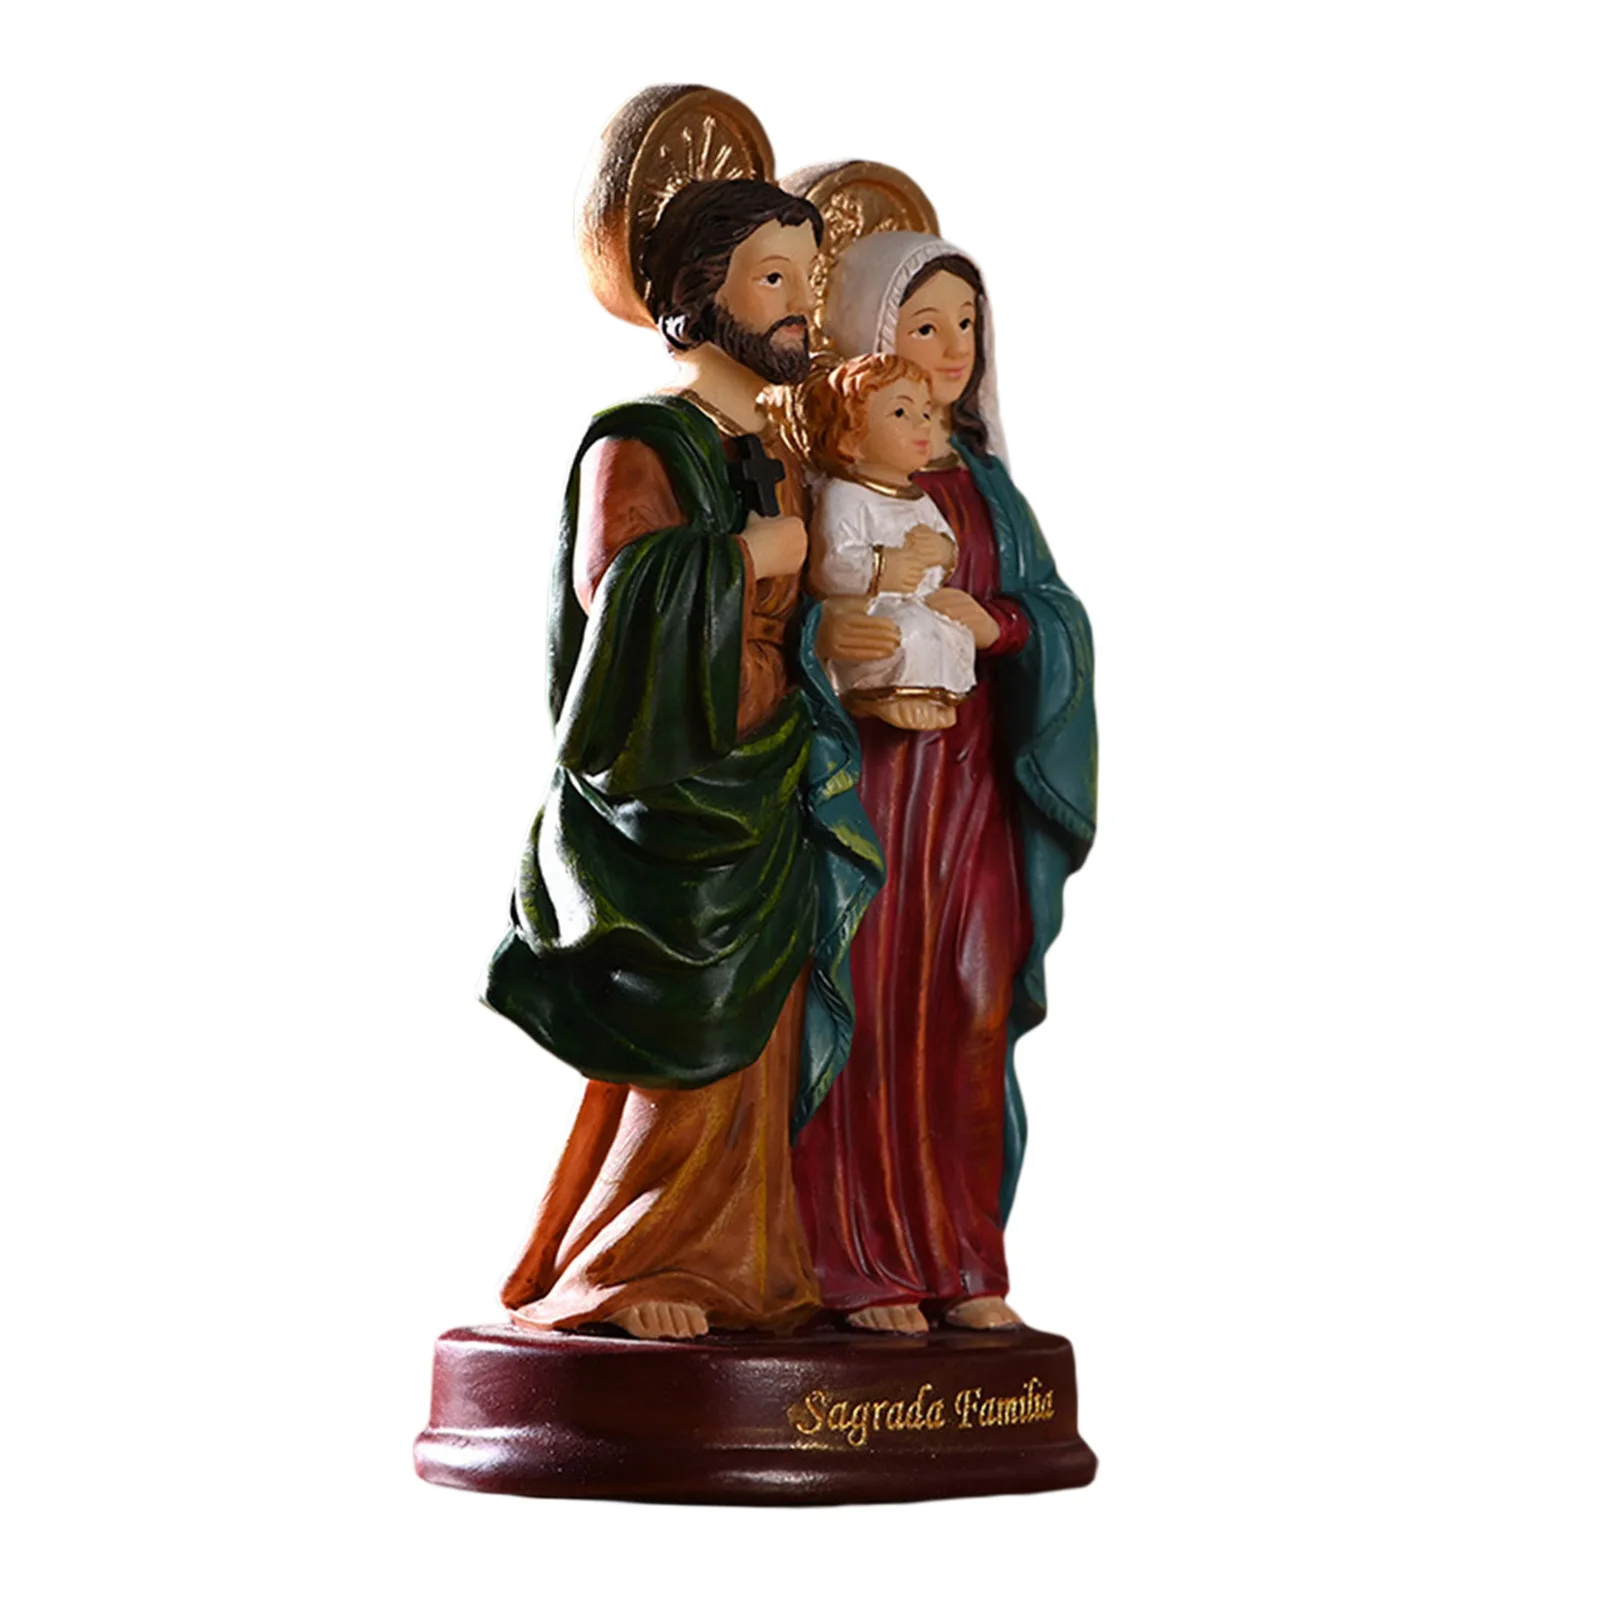 Holy Family Statues Figure Child Jesus Christ Figurine Home Decorative Sculptures Catholic Church Souvenirs Gifts